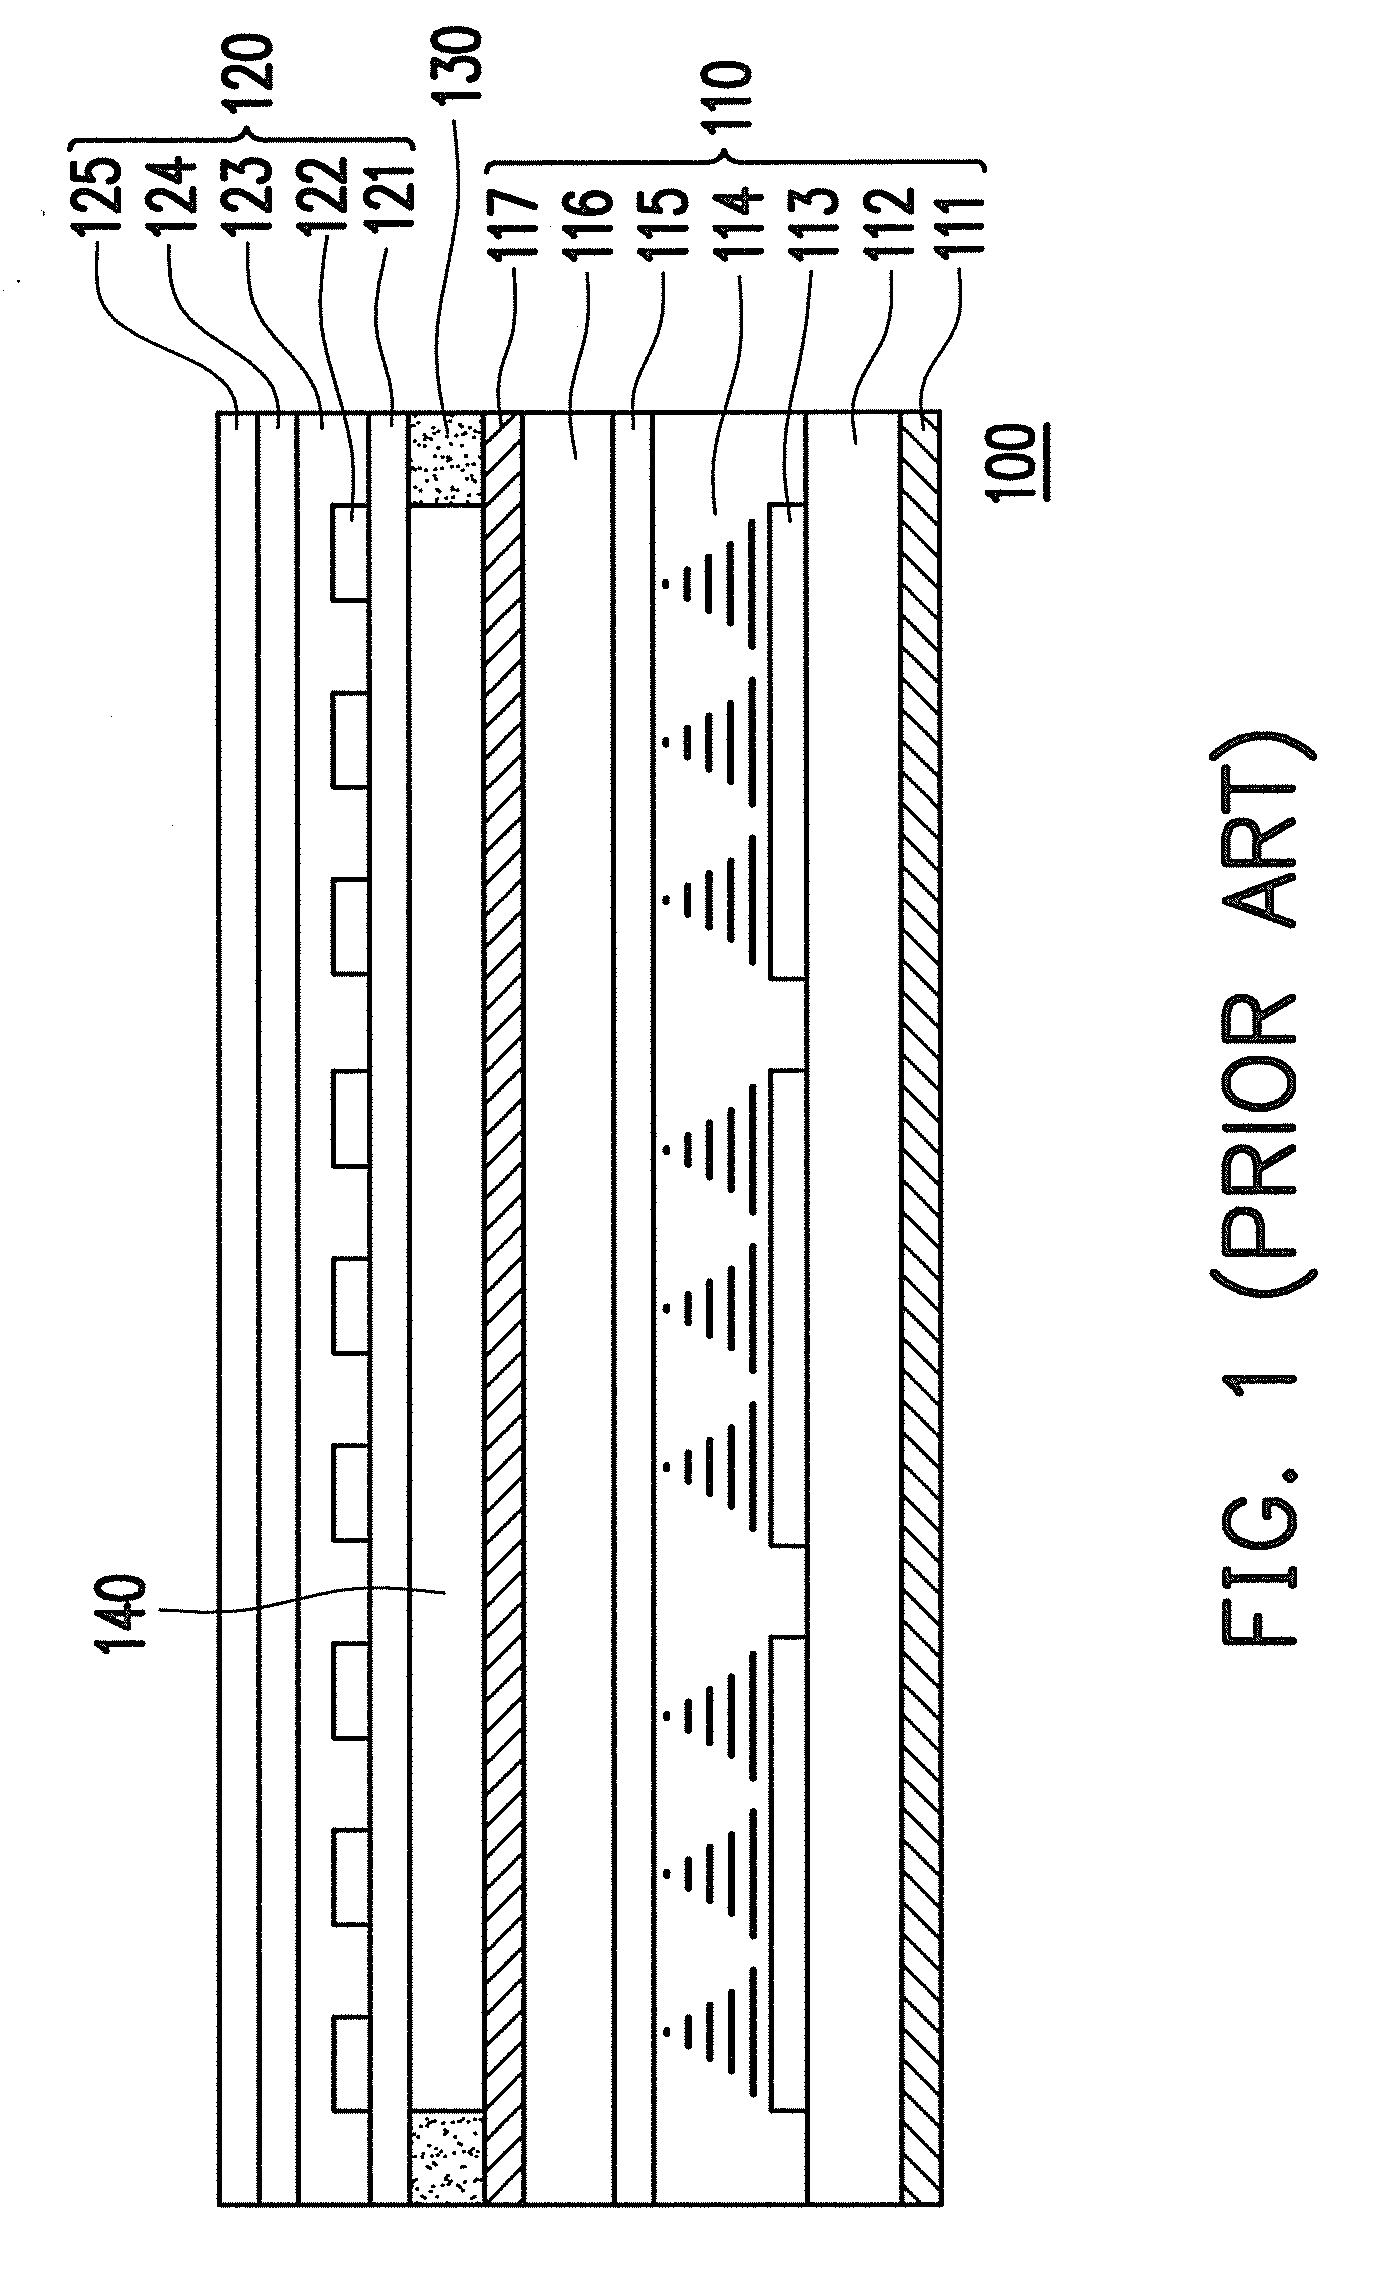 Touch display, liquid crystal display with a built-in touch panel